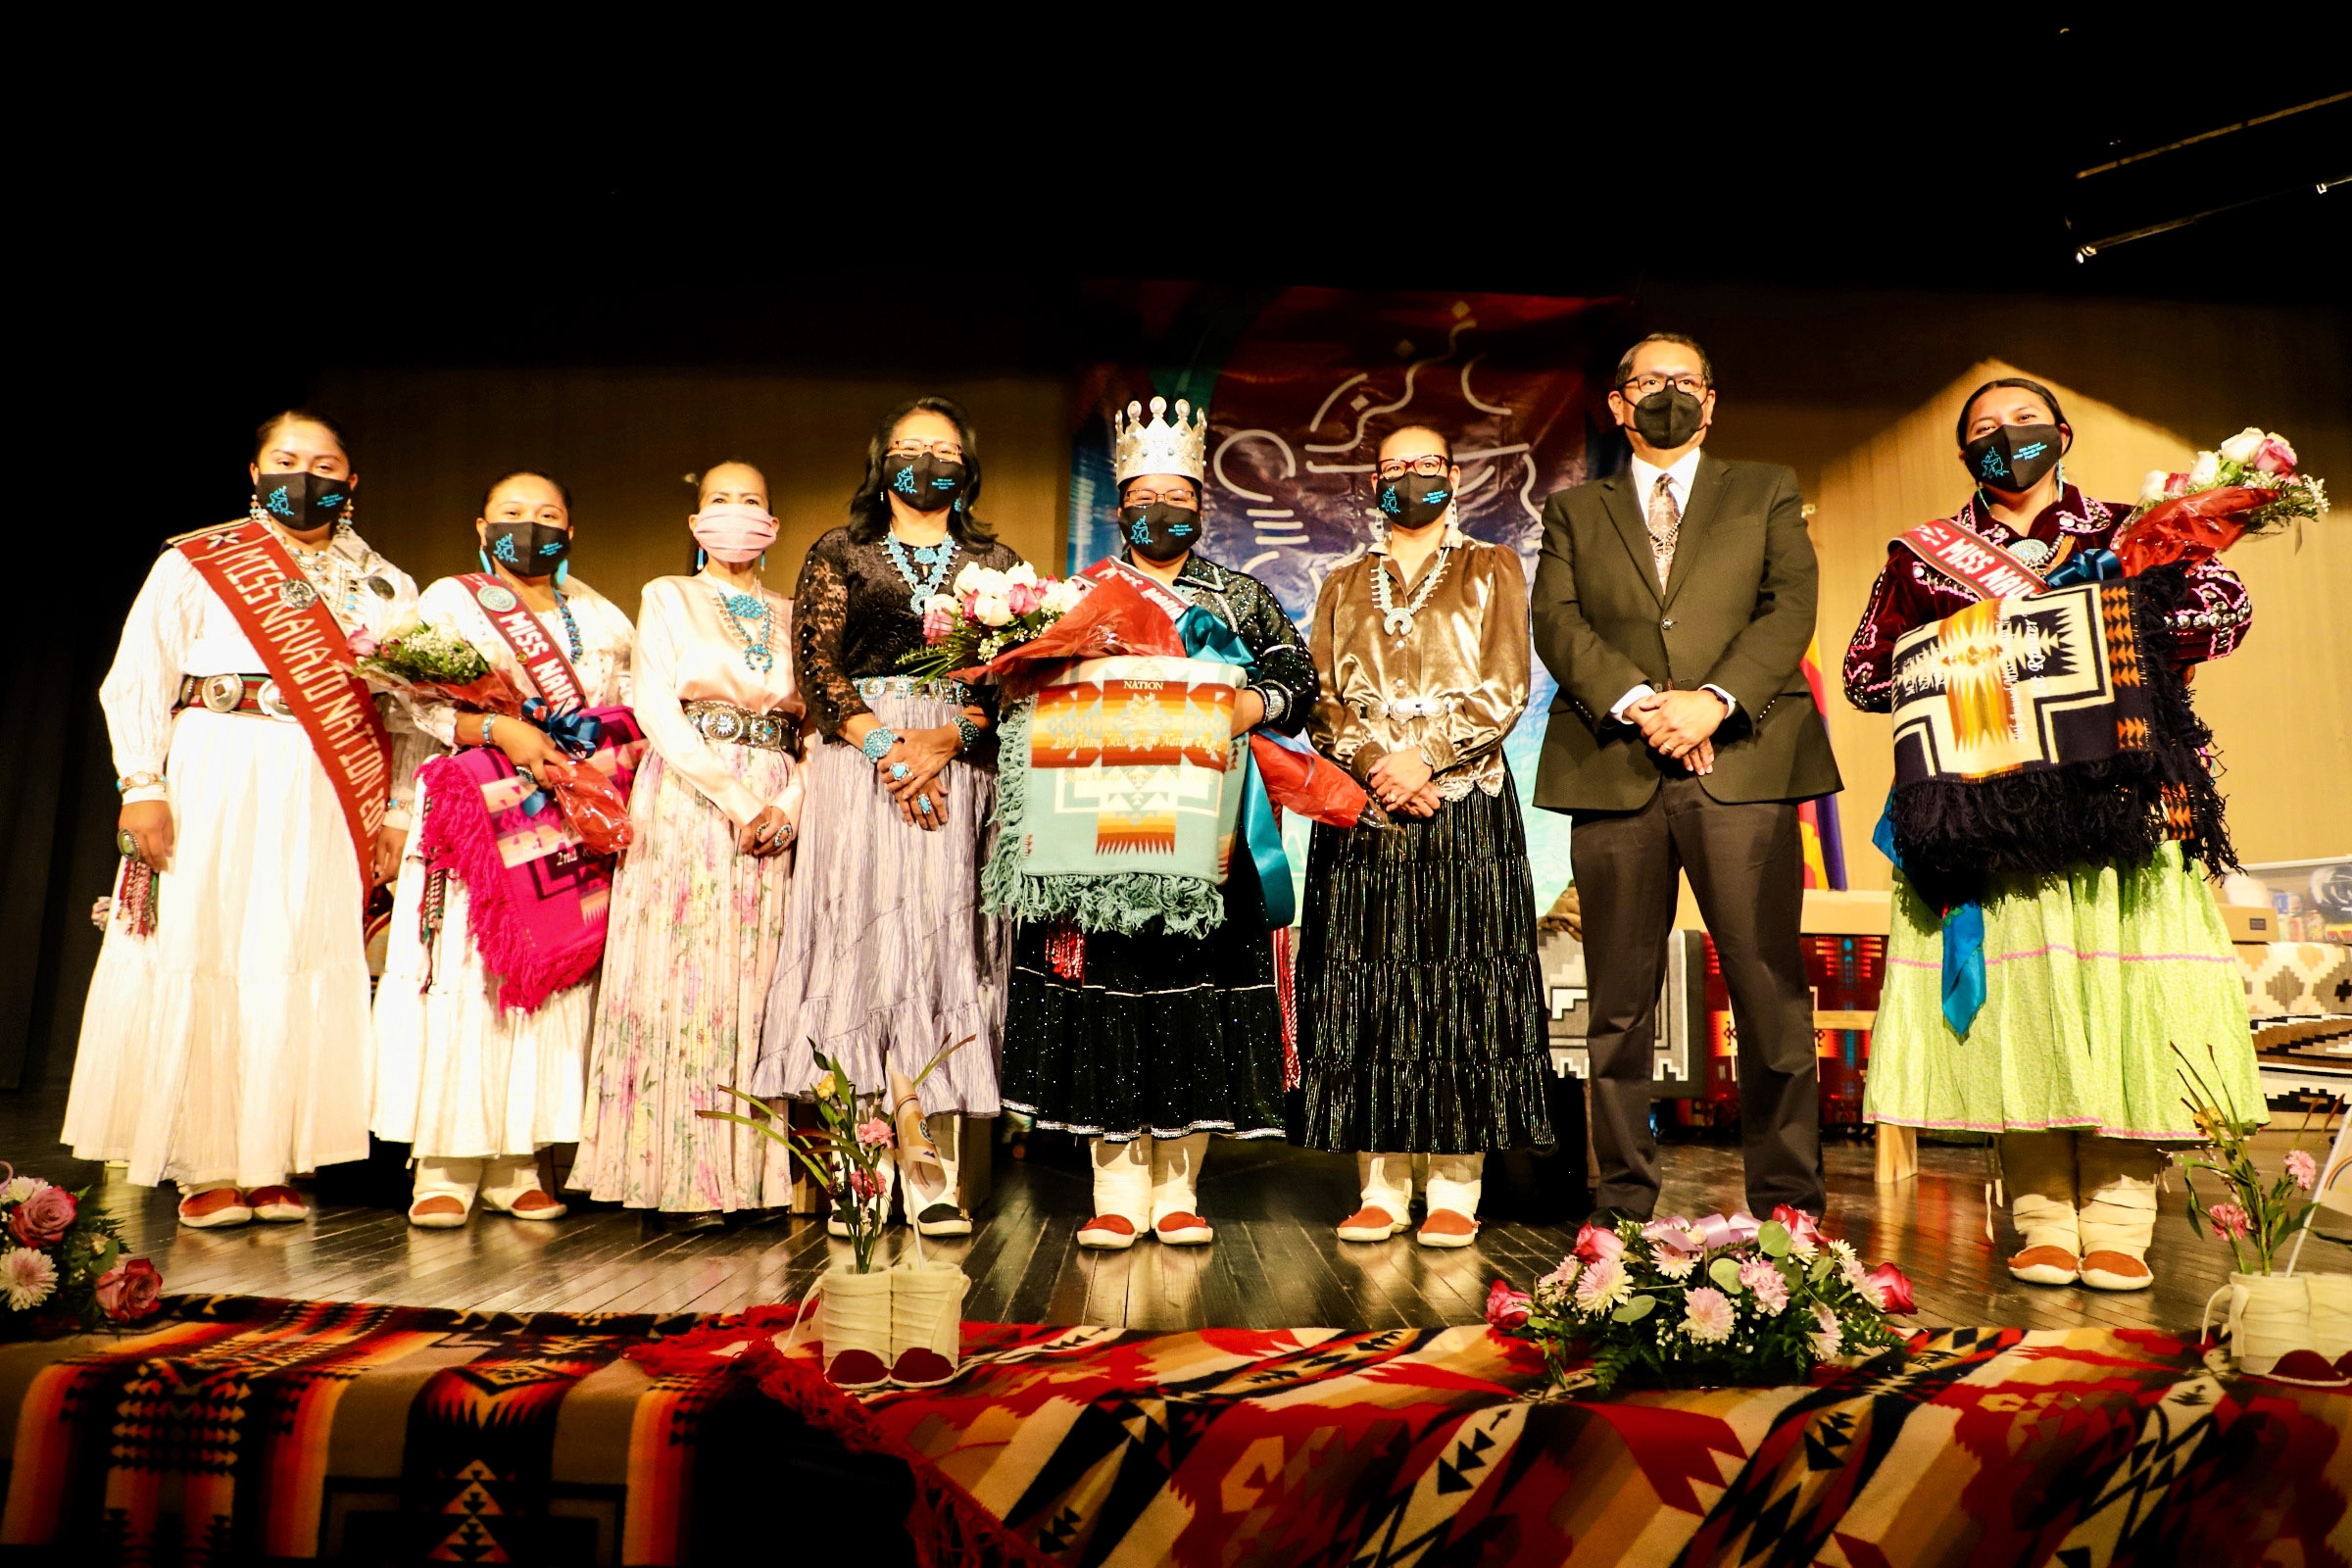 Miss Navajo Nation Pageant